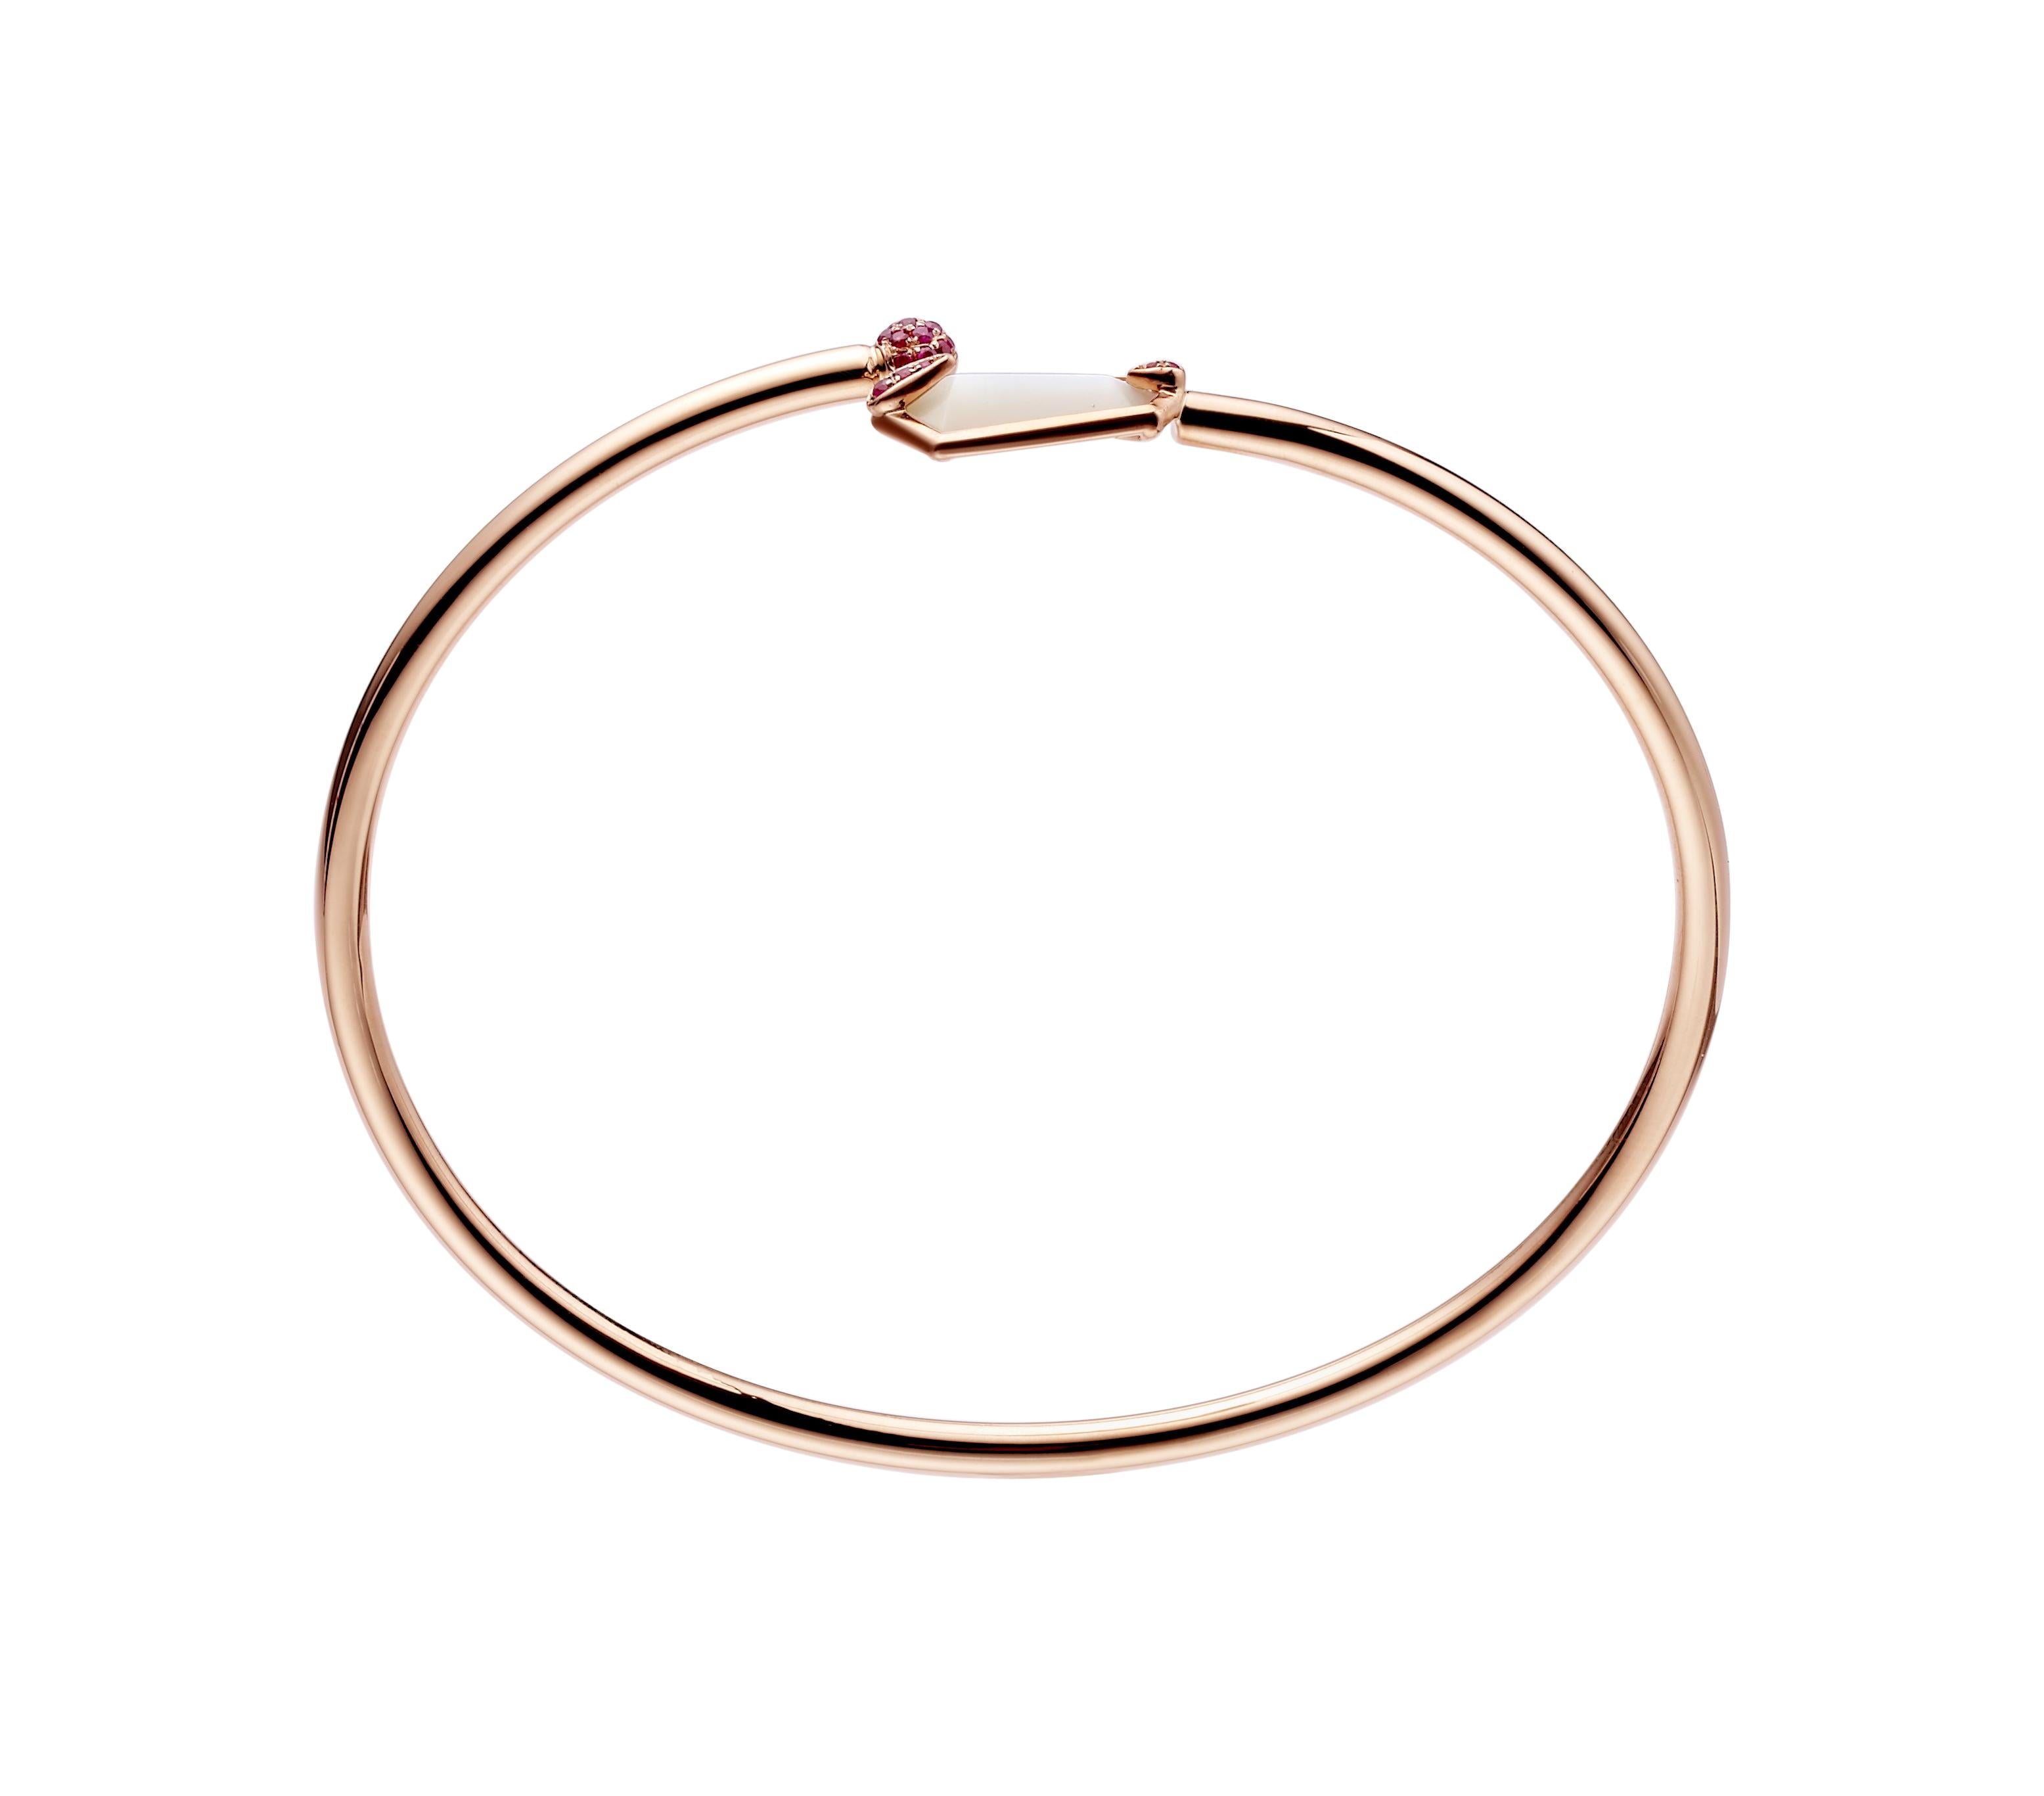 Contemporary Fei Liu Mother of Pearl Pink Sapphire Rose Gold Bangle Bracelet